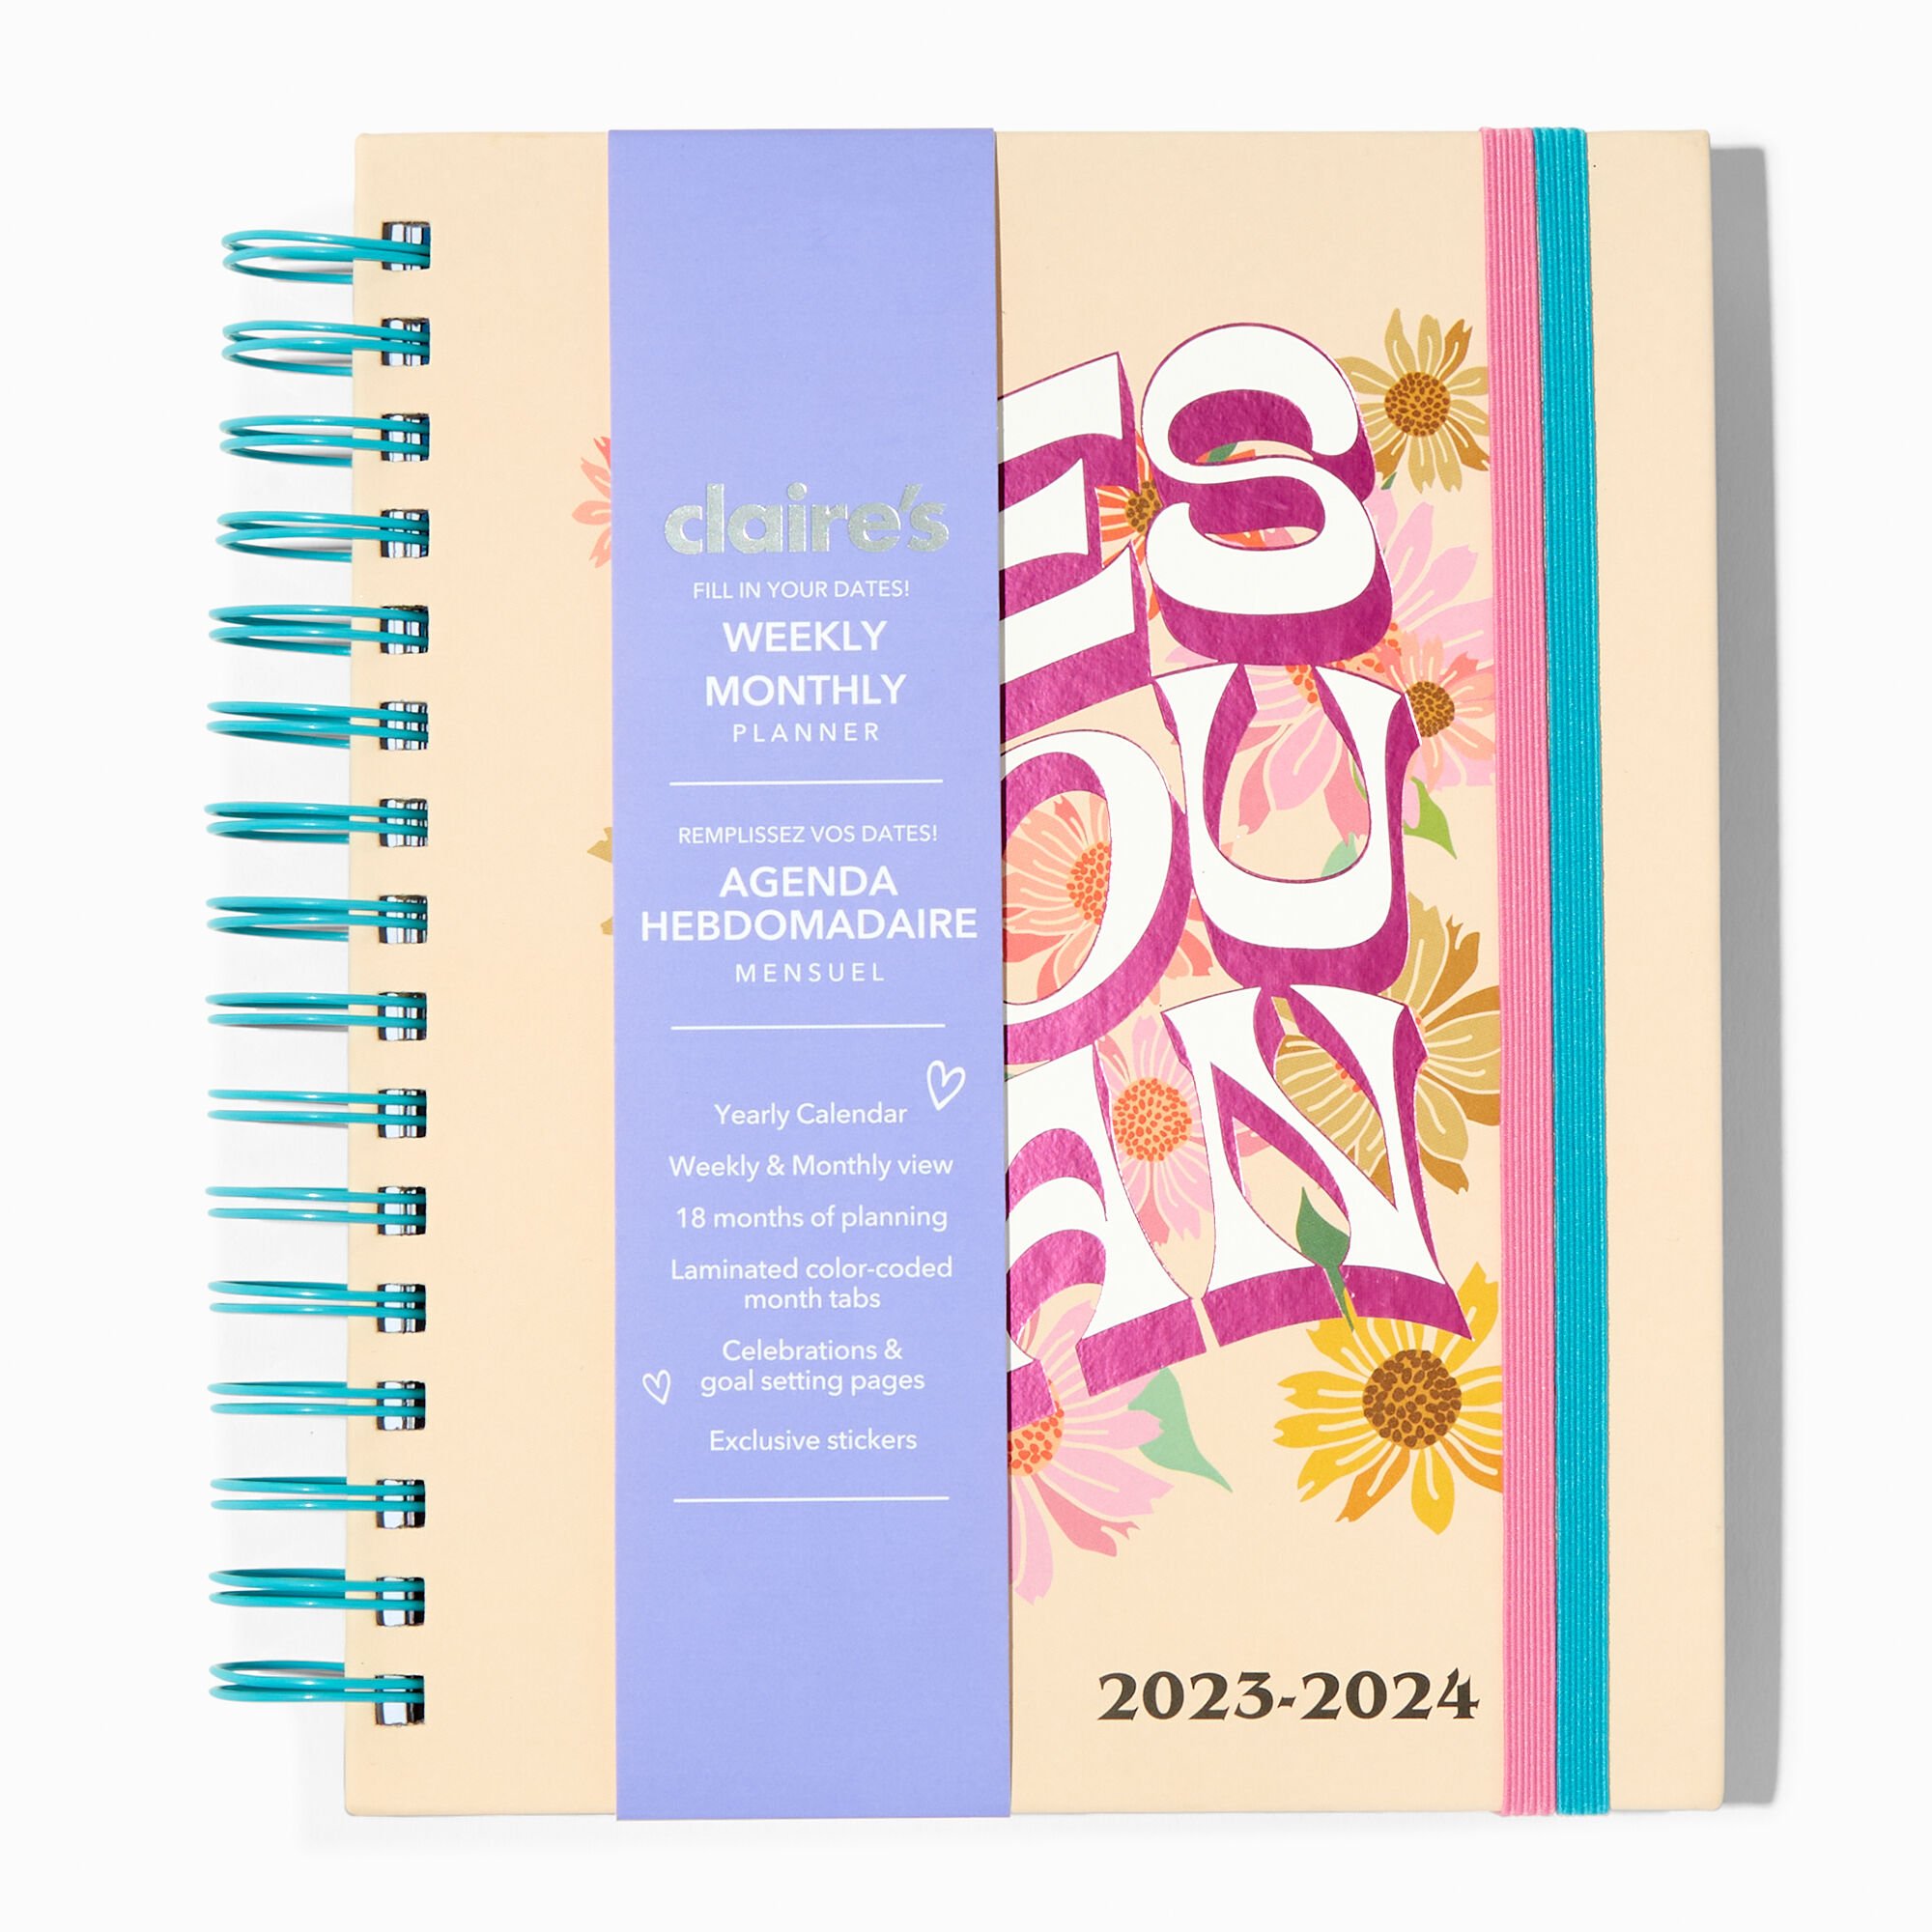 View Claires Yes You Can 202324 Weeklymonthly Planner information